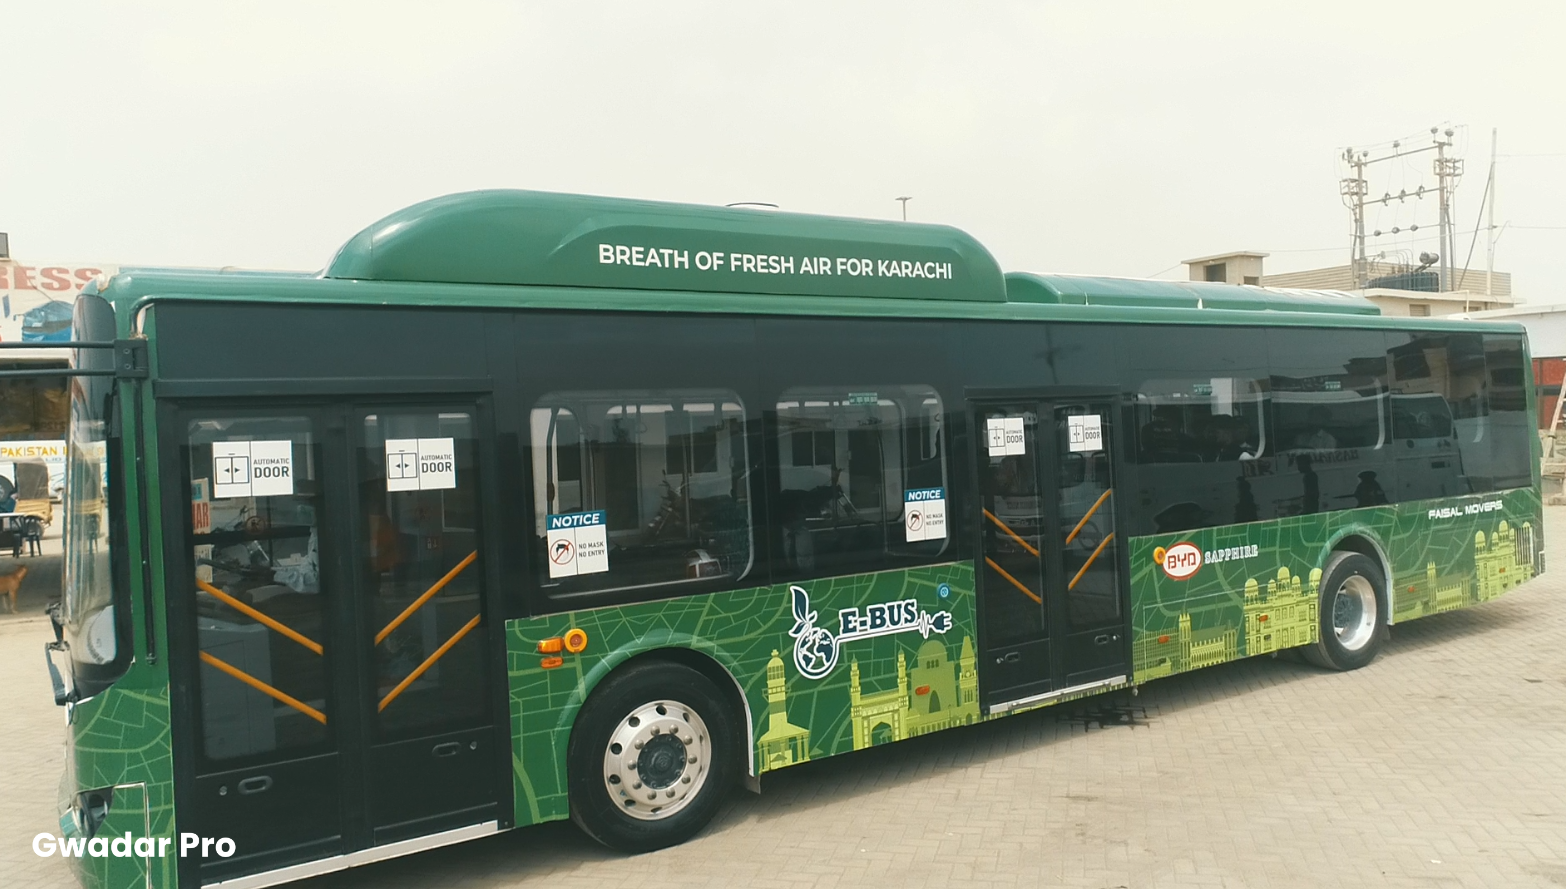 E-bus, a Pak-China coop model, to fuel a greener future